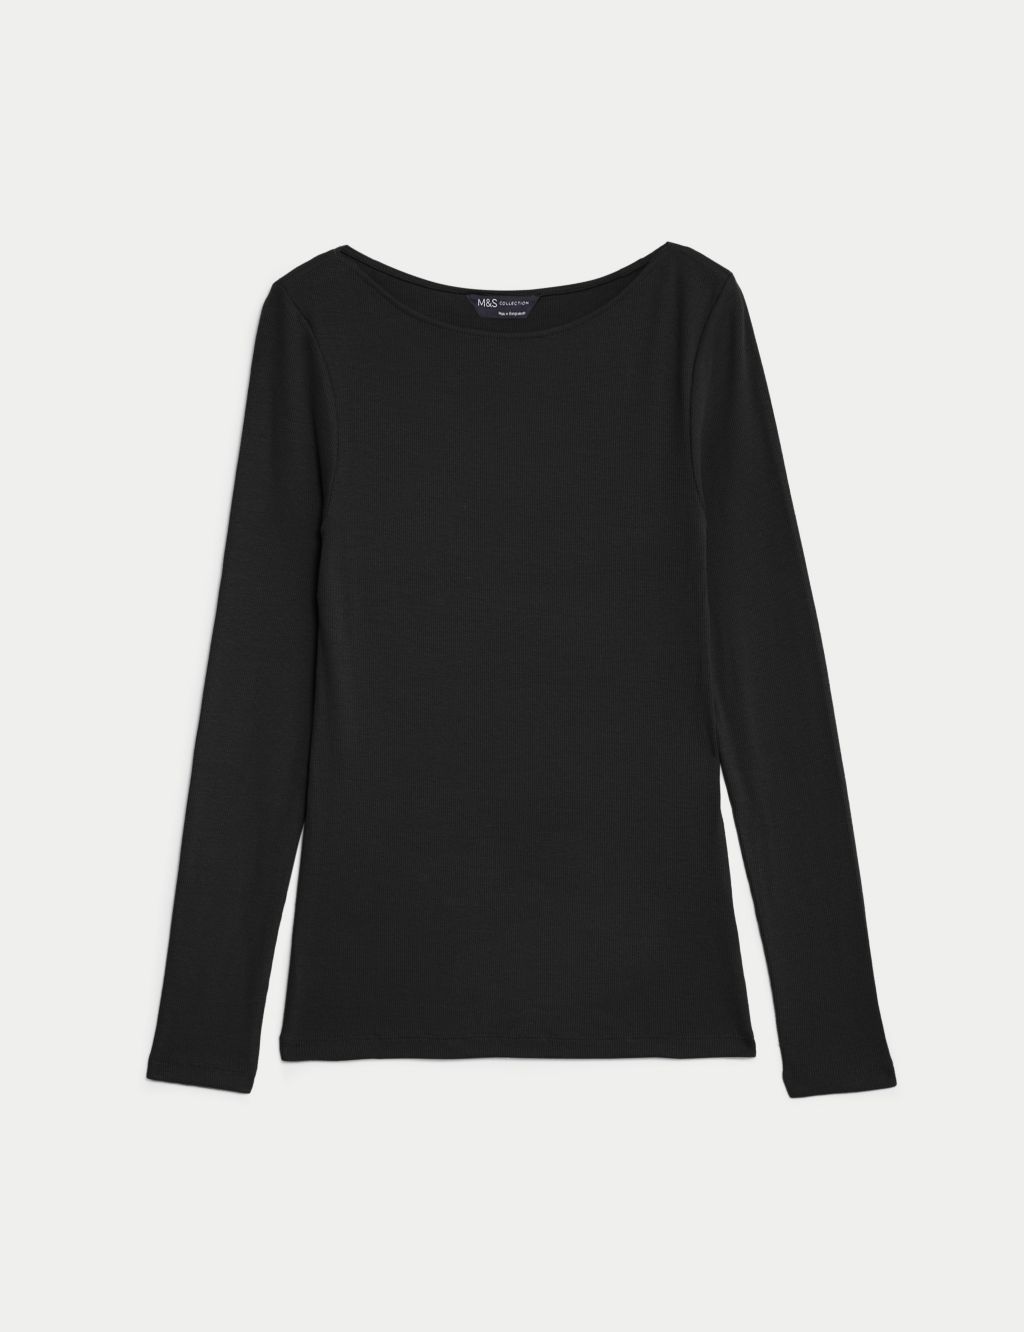 Page 2 - Women’s Tops | M&S